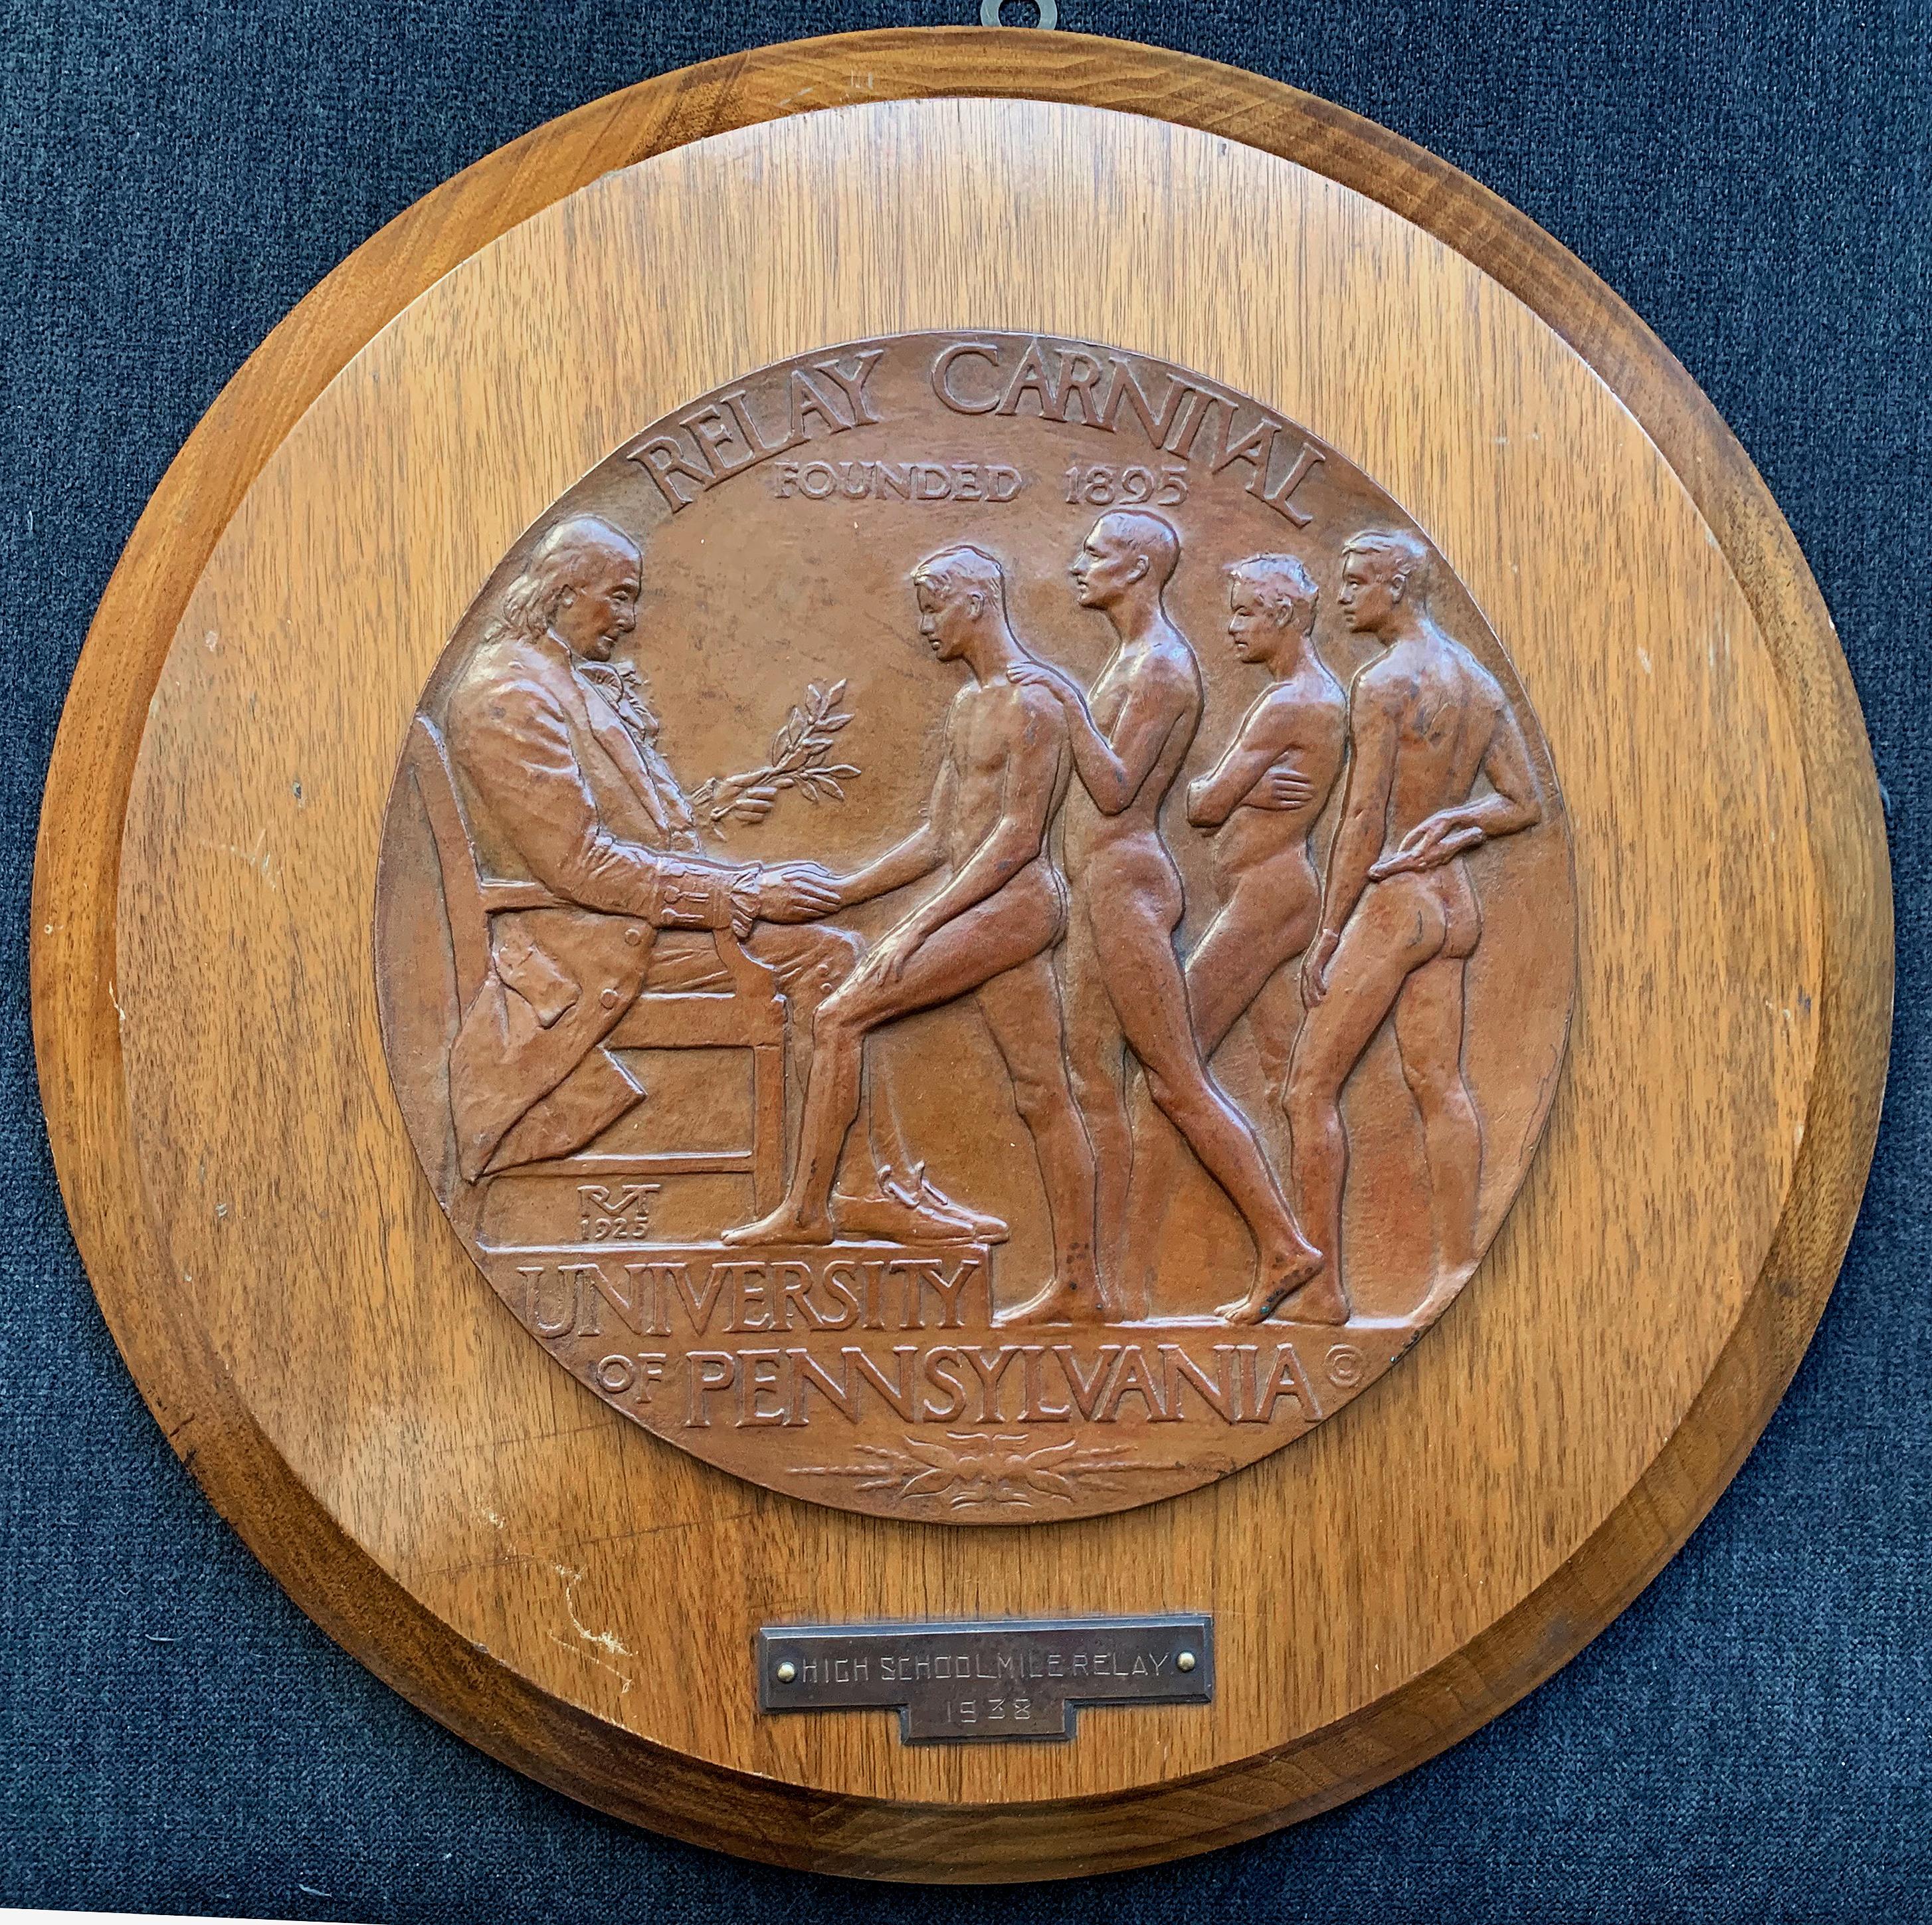 Large and rare, this bronze bas relief plaque was created by the world's leading sculptor of young athletes for the University of Pennsylvania's Relay Carnival, now known as the Penn Relays, a prestigious track and field event for college athletes